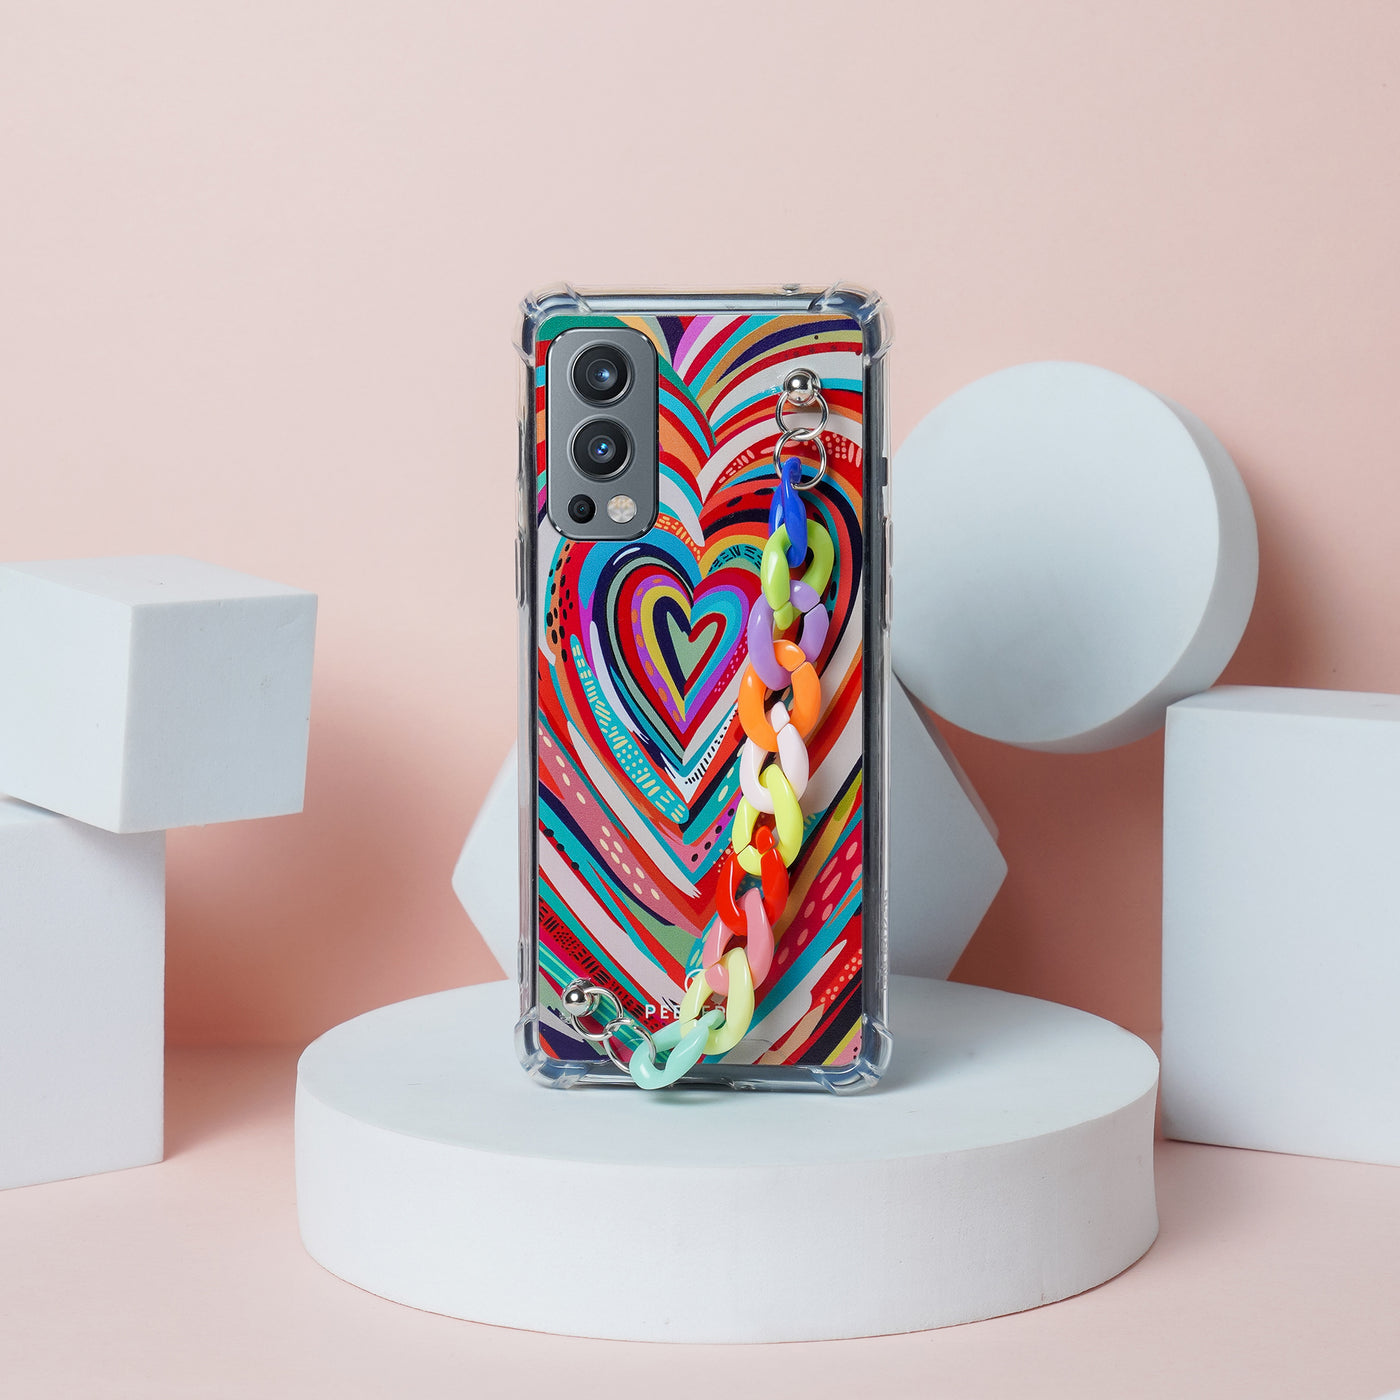 Swirl Love Colored Case with Bracelet - OnePlus